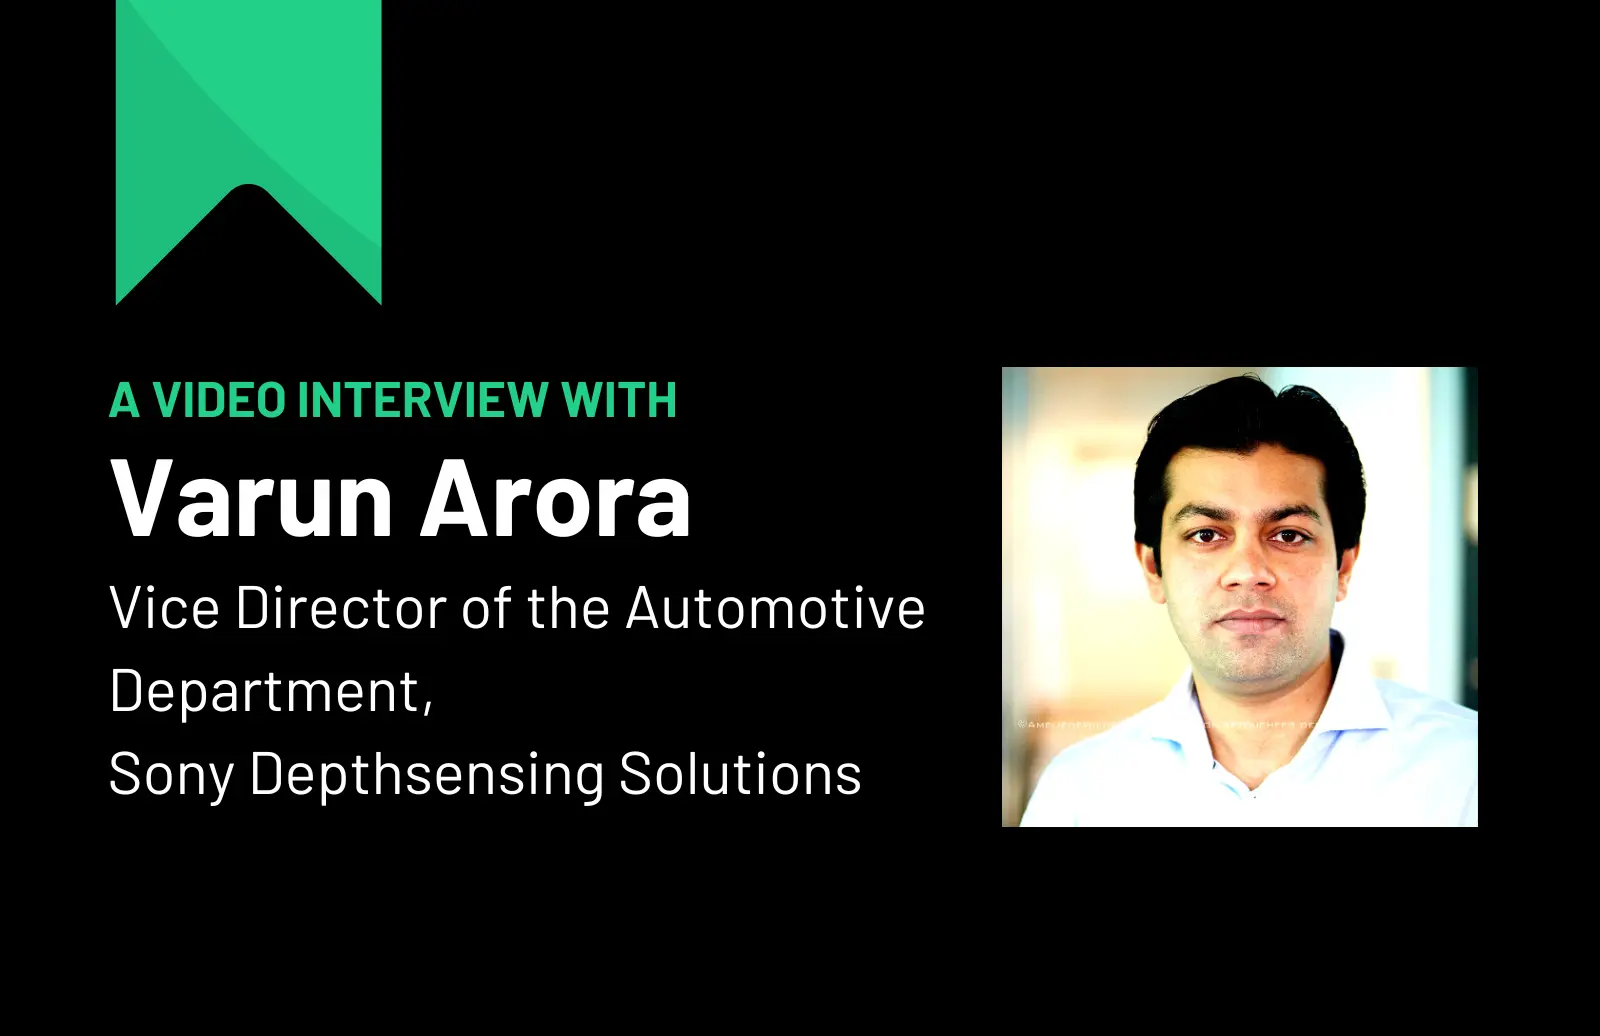 A video interview with Varun Arora, Vice Director of the Automotive Department at Sony Depthsensing Solutions